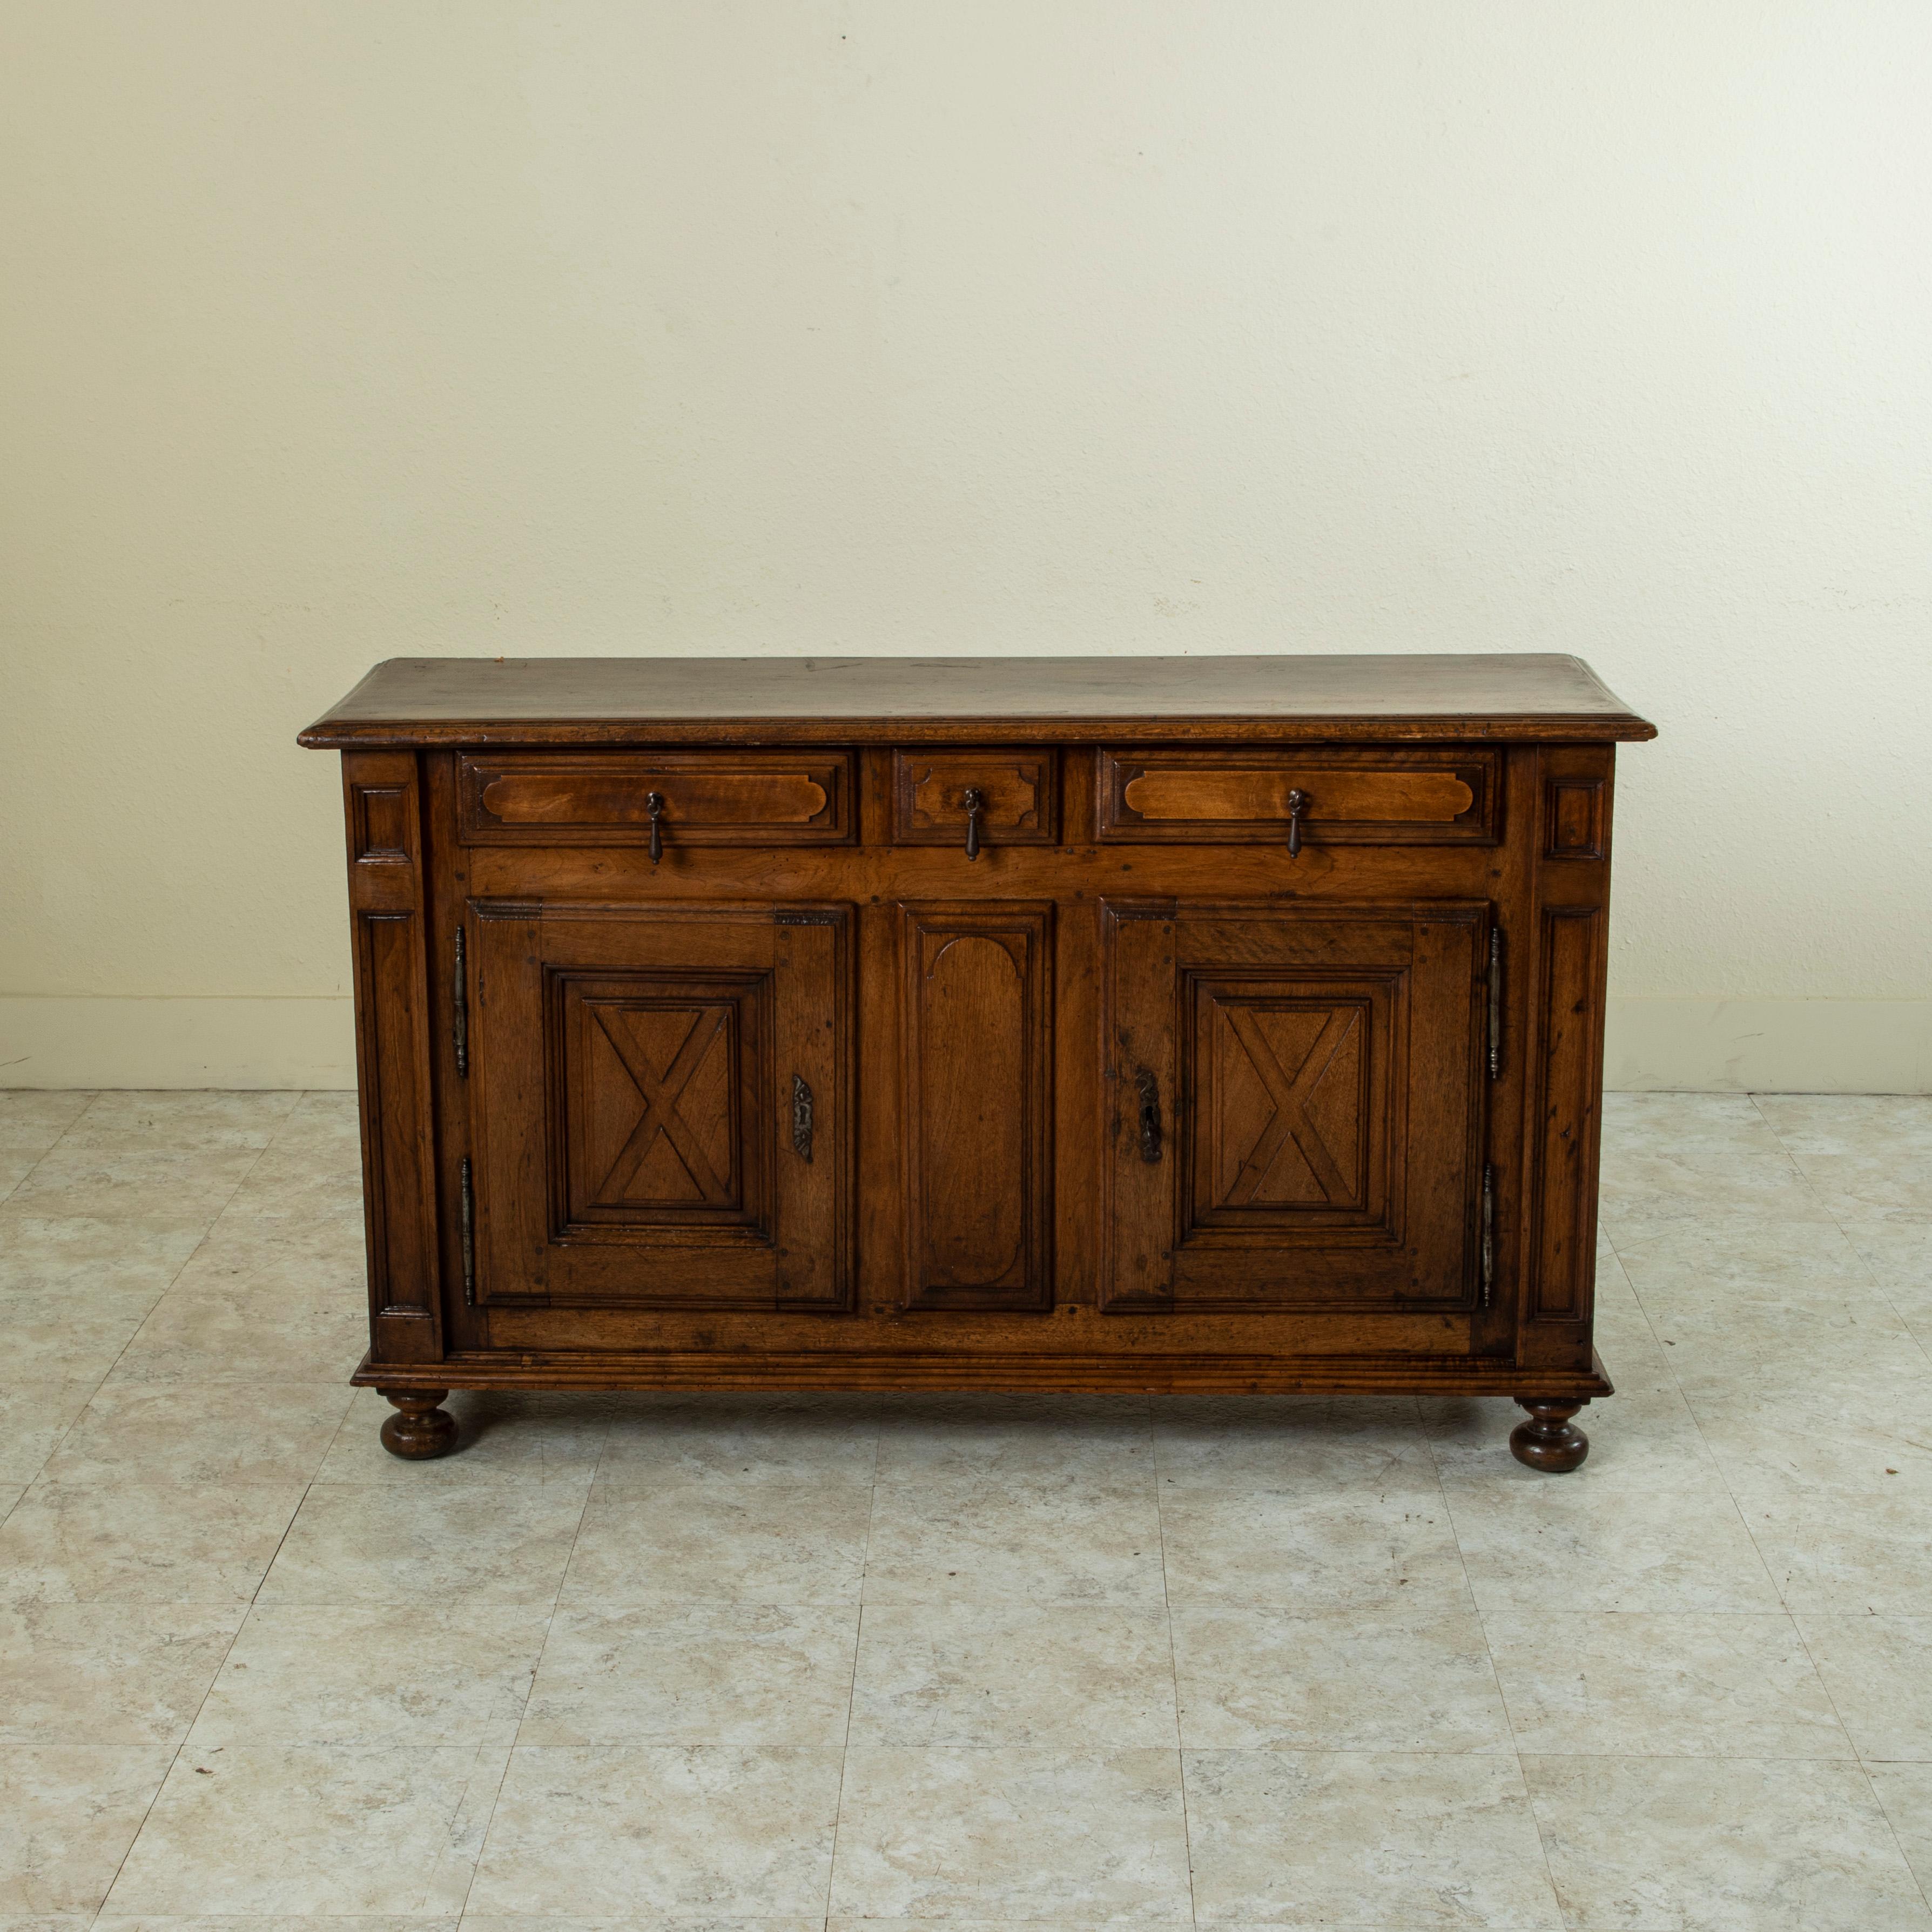 This mid-seventeenth century French Louis XIII period walnut sideboard or buffet features hand pegged construction and solid panels on both front and sides. The buffet has a beveled top made of a single piece of walnut and rests on bun feet. Three